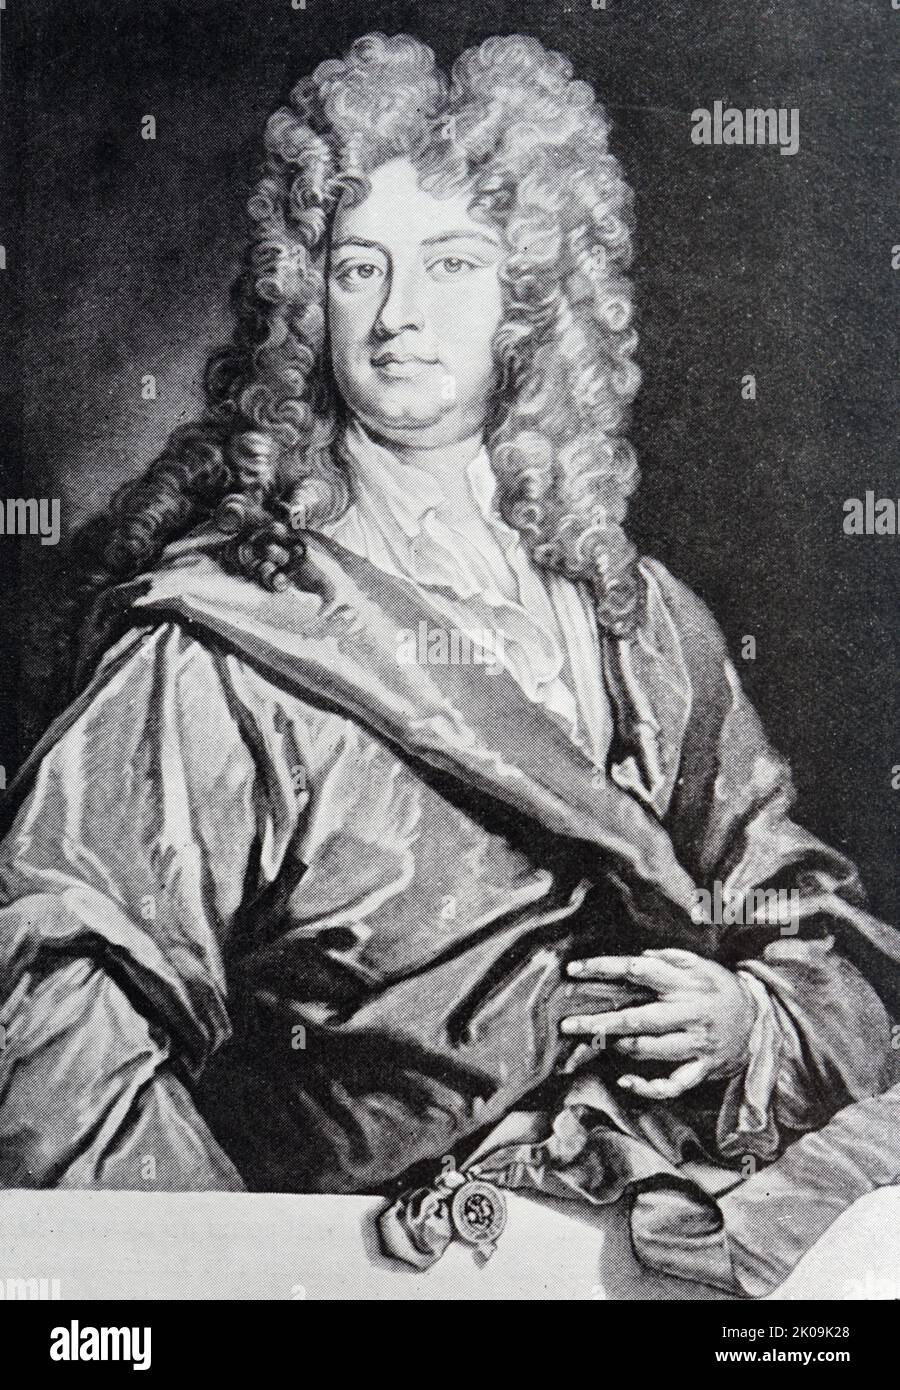 Charles Montagu, 1st Earl of Halifax KG PC PRS (16 April 1661 - 19 May 1715) was an English statesman and poet. He was the grandson of the 1st Earl of Manchester and was eventually ennobled himself, first as Baron Halifax in 1700 and later as Earl of Halifax in 1714. Stock Photo